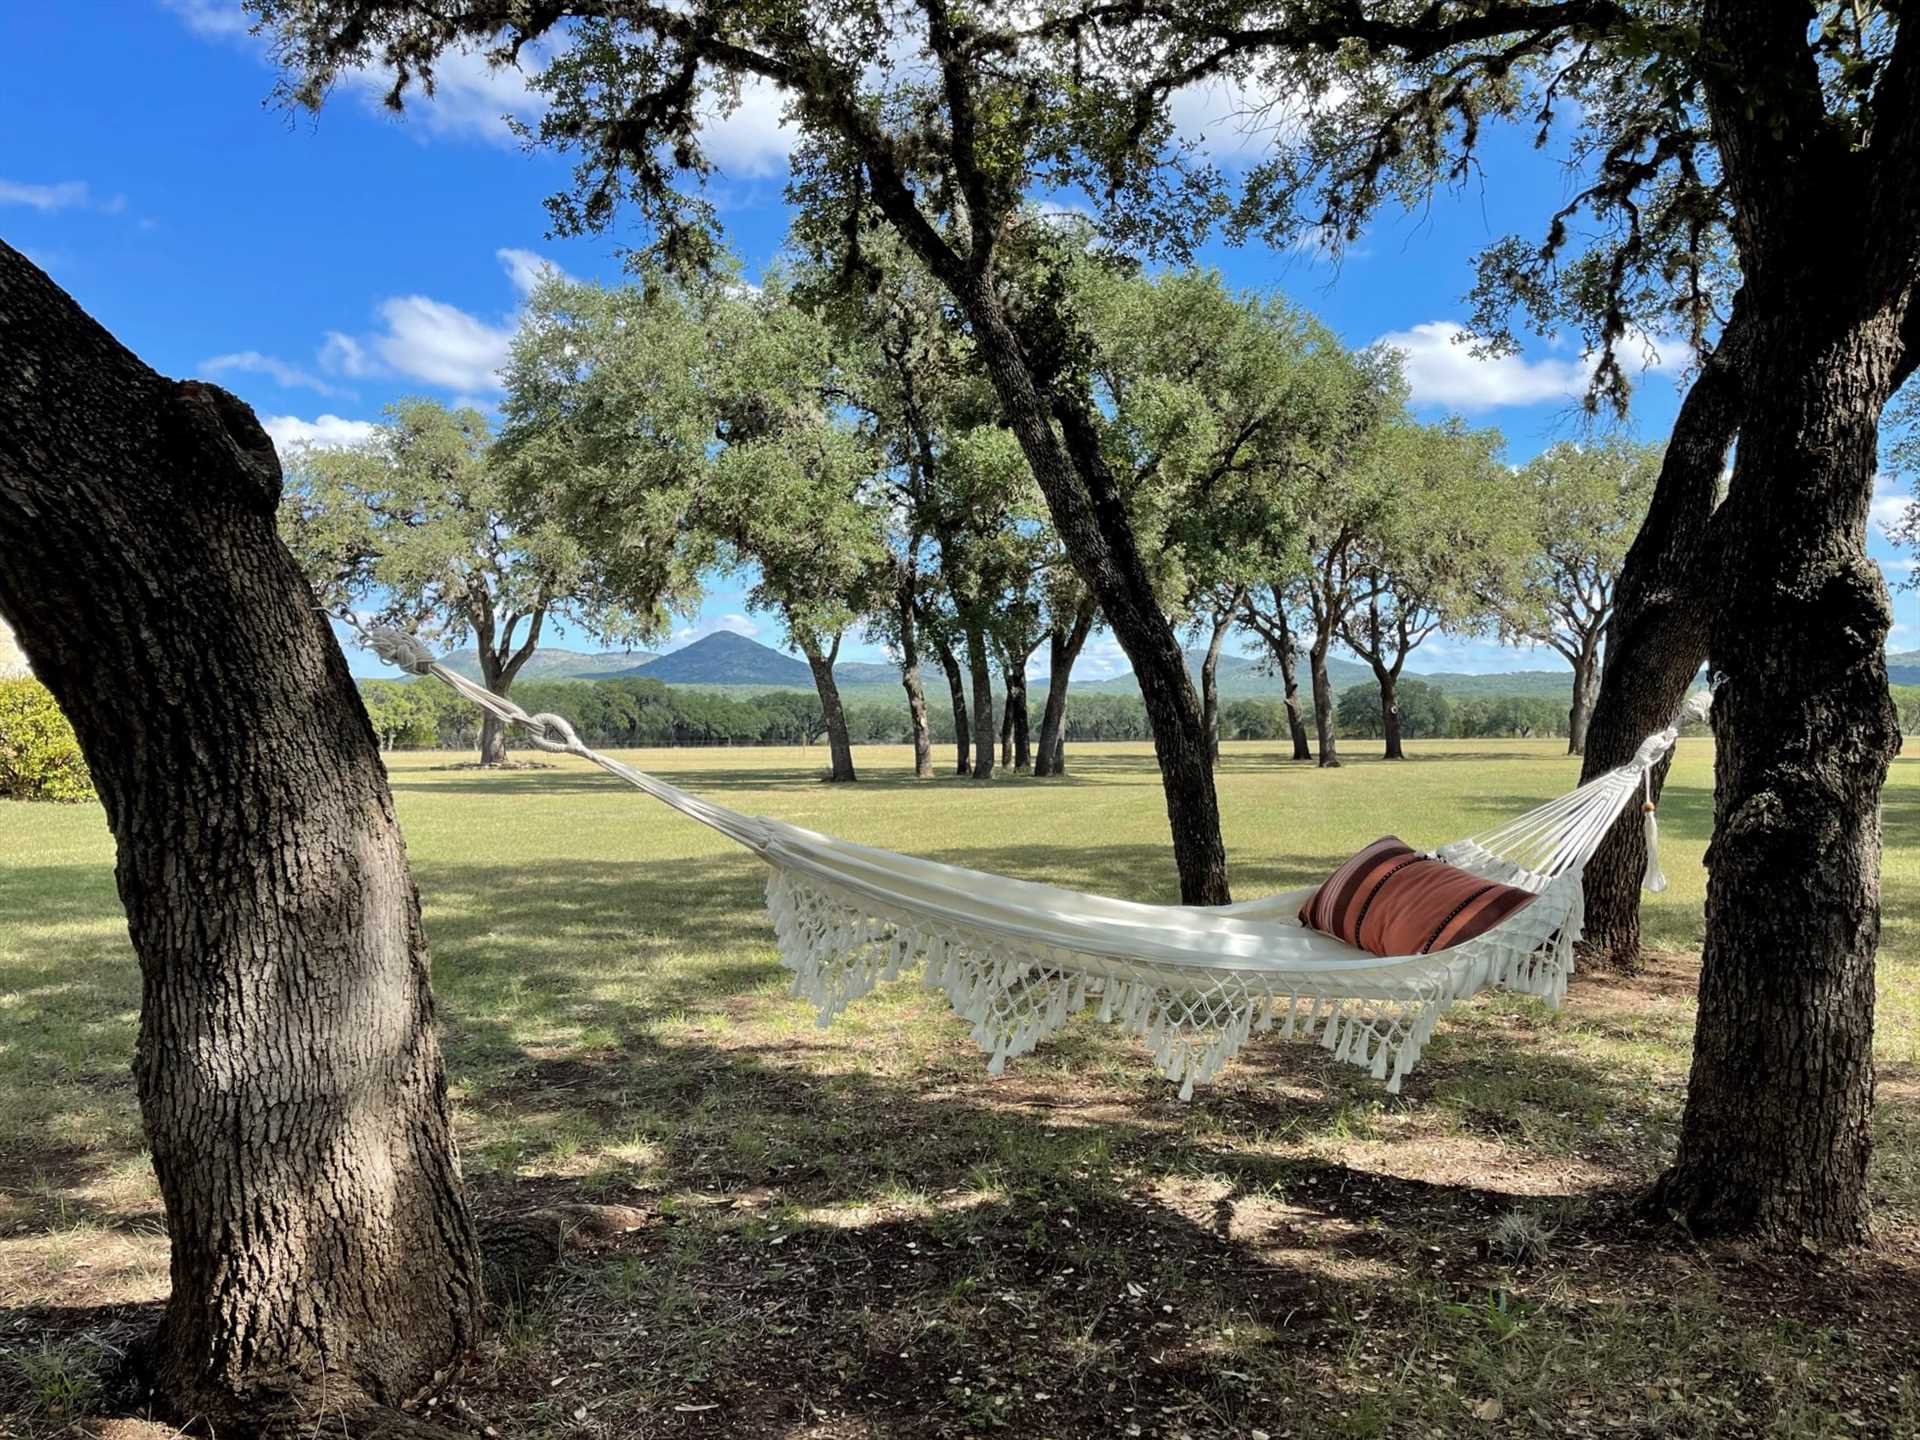                                                 We won't tell anyone if you sneak off for a quiet moment or two on the comfy tree-mounted hammock!